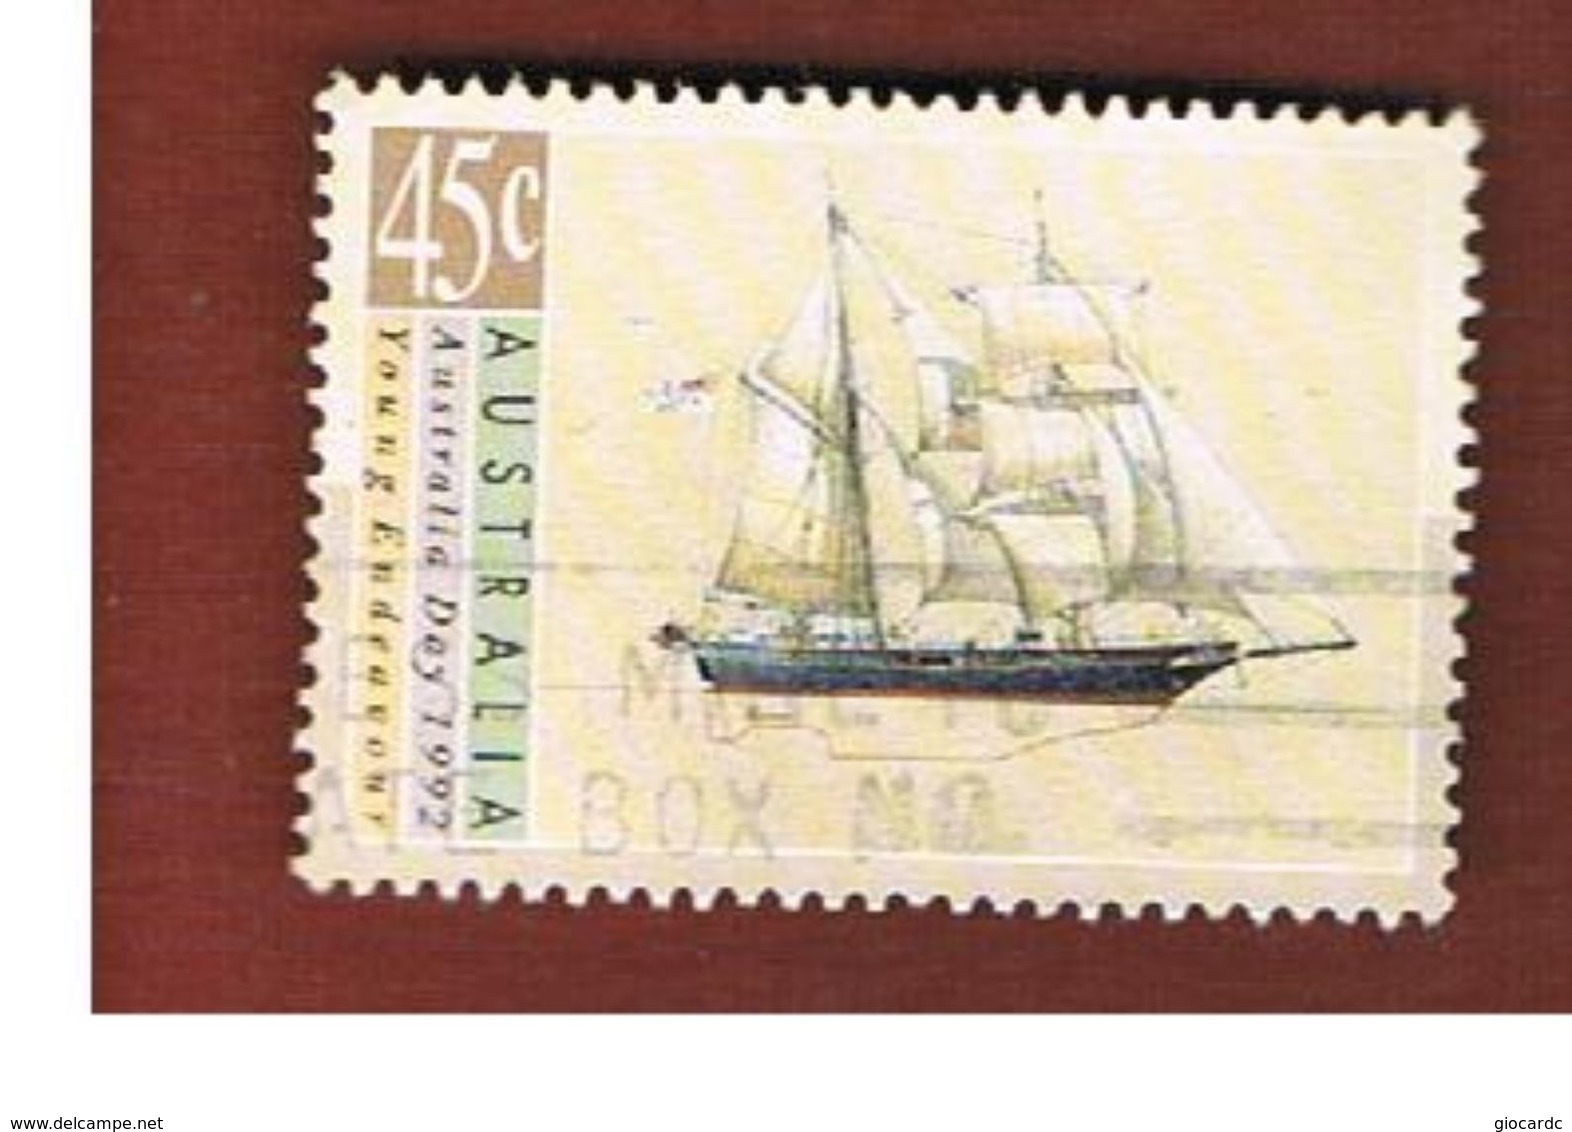 AUSTRALIA  -  SG 1333  -      1992 SHIPS: YOUNG ENDEAVOUR           -       USED - Usati